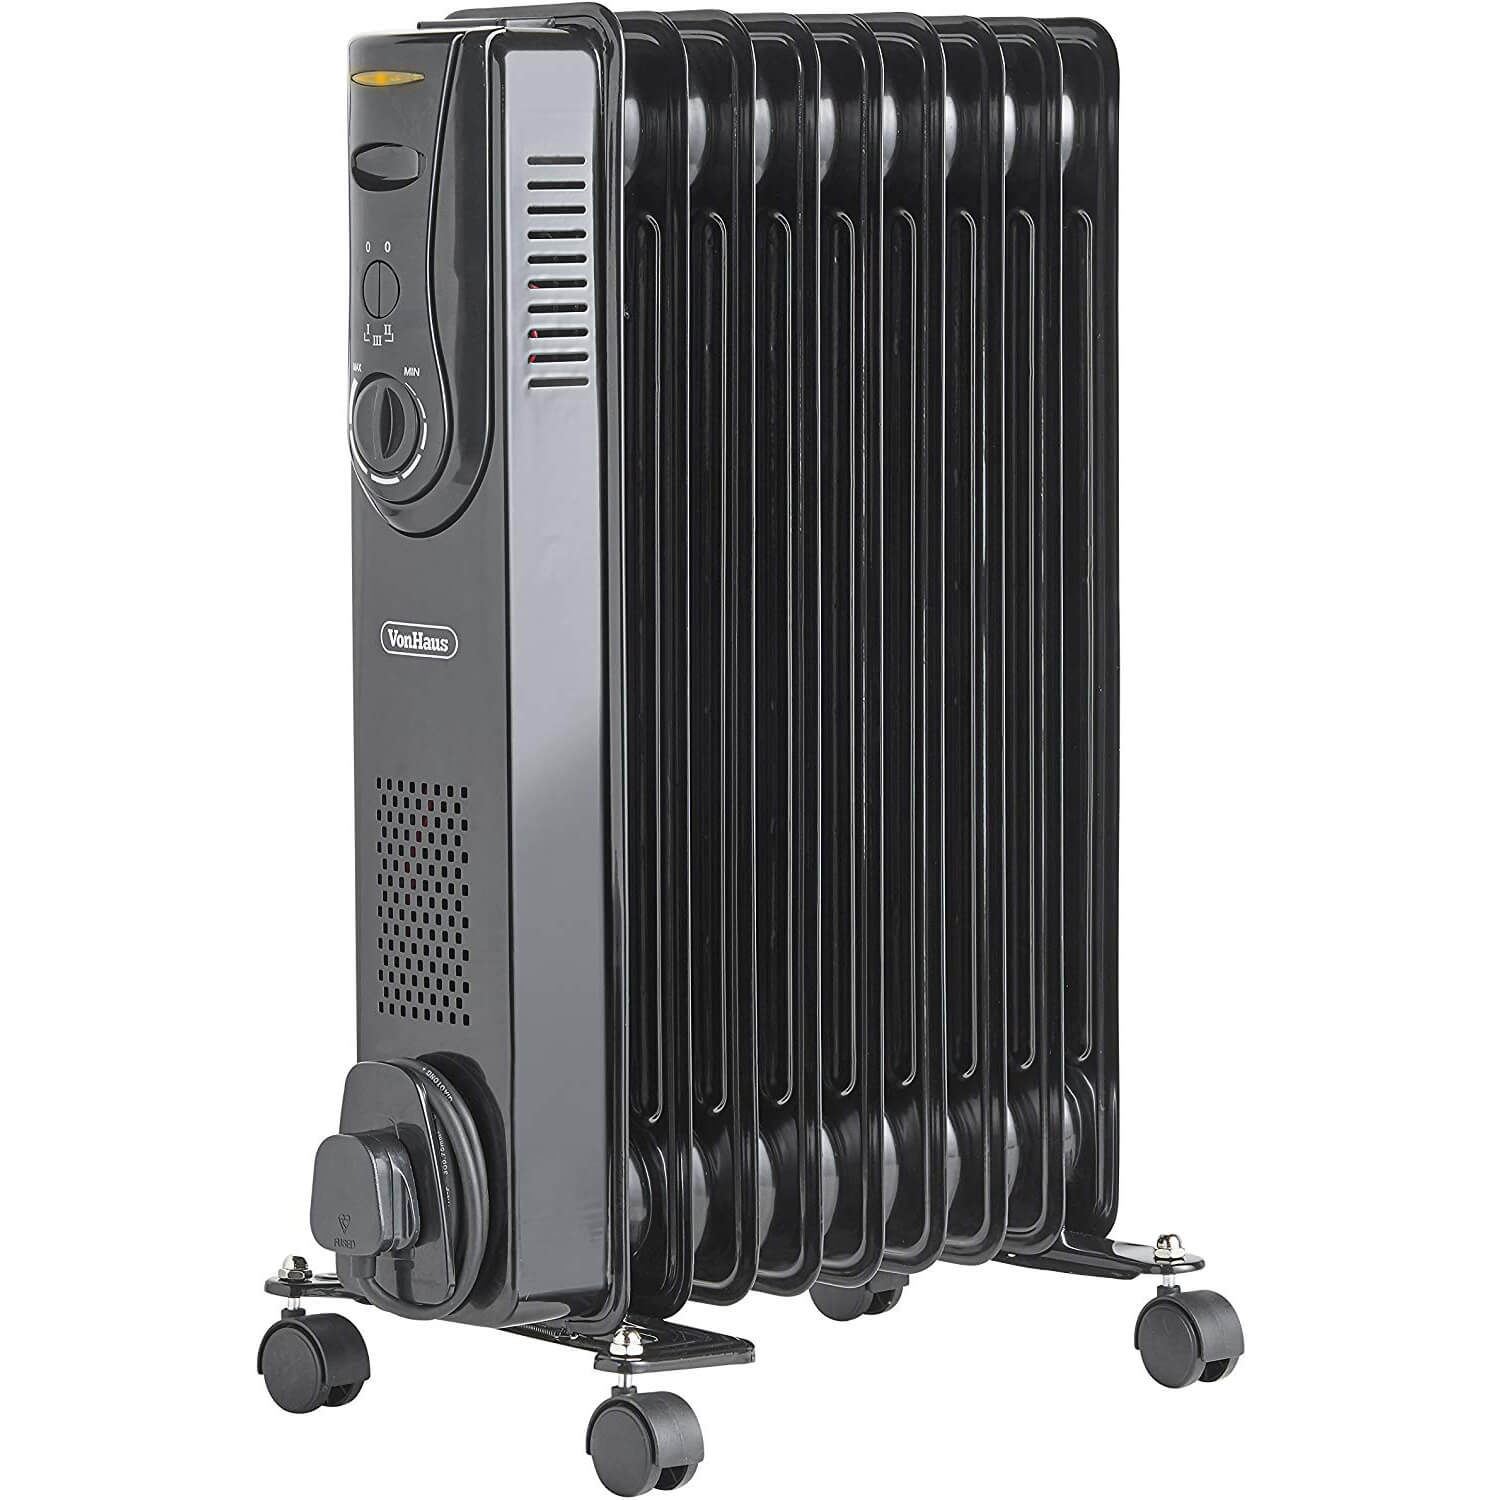 Oypla Electrical 2000W 9 Fin Portable Oil Filled Radiator Electric Heater 